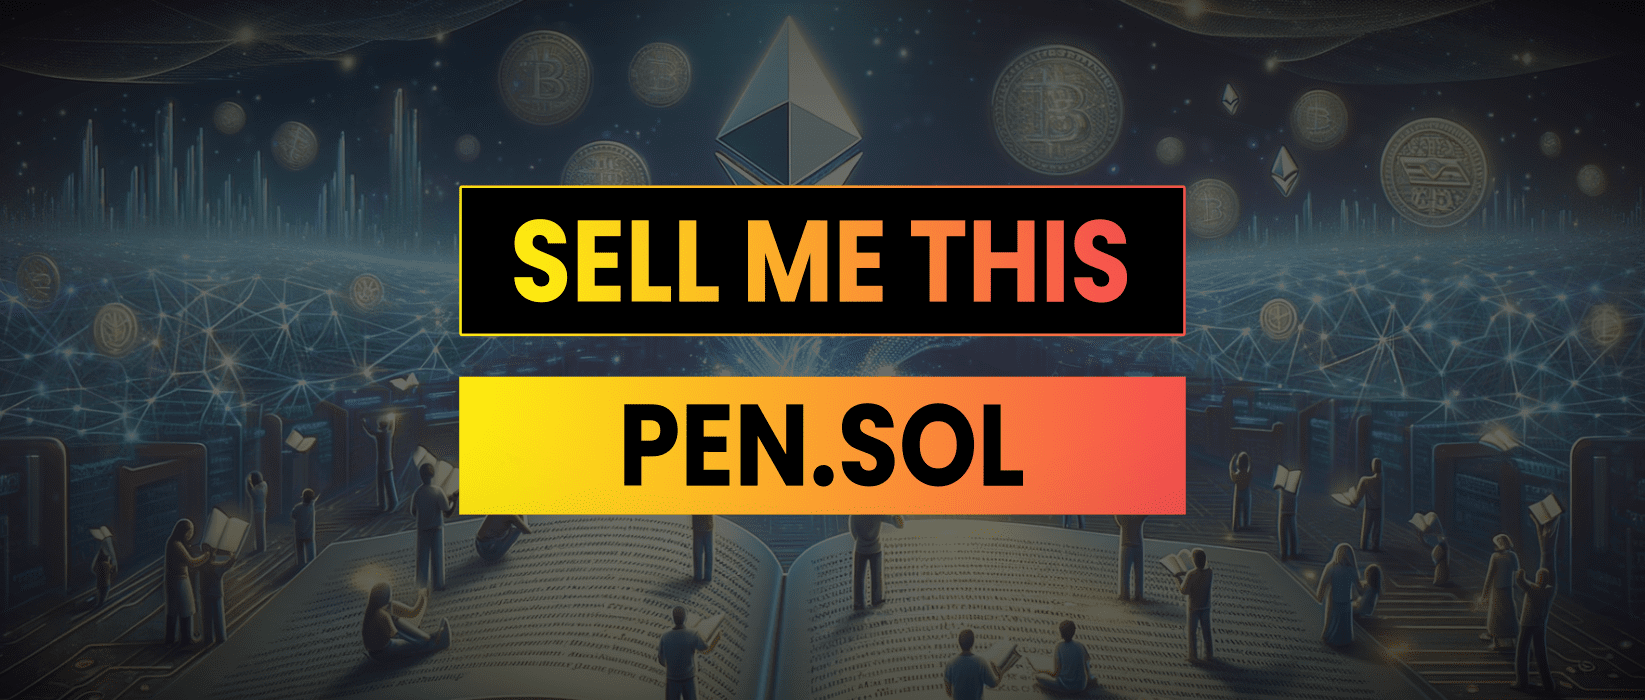 Sell Me This Pen.sol